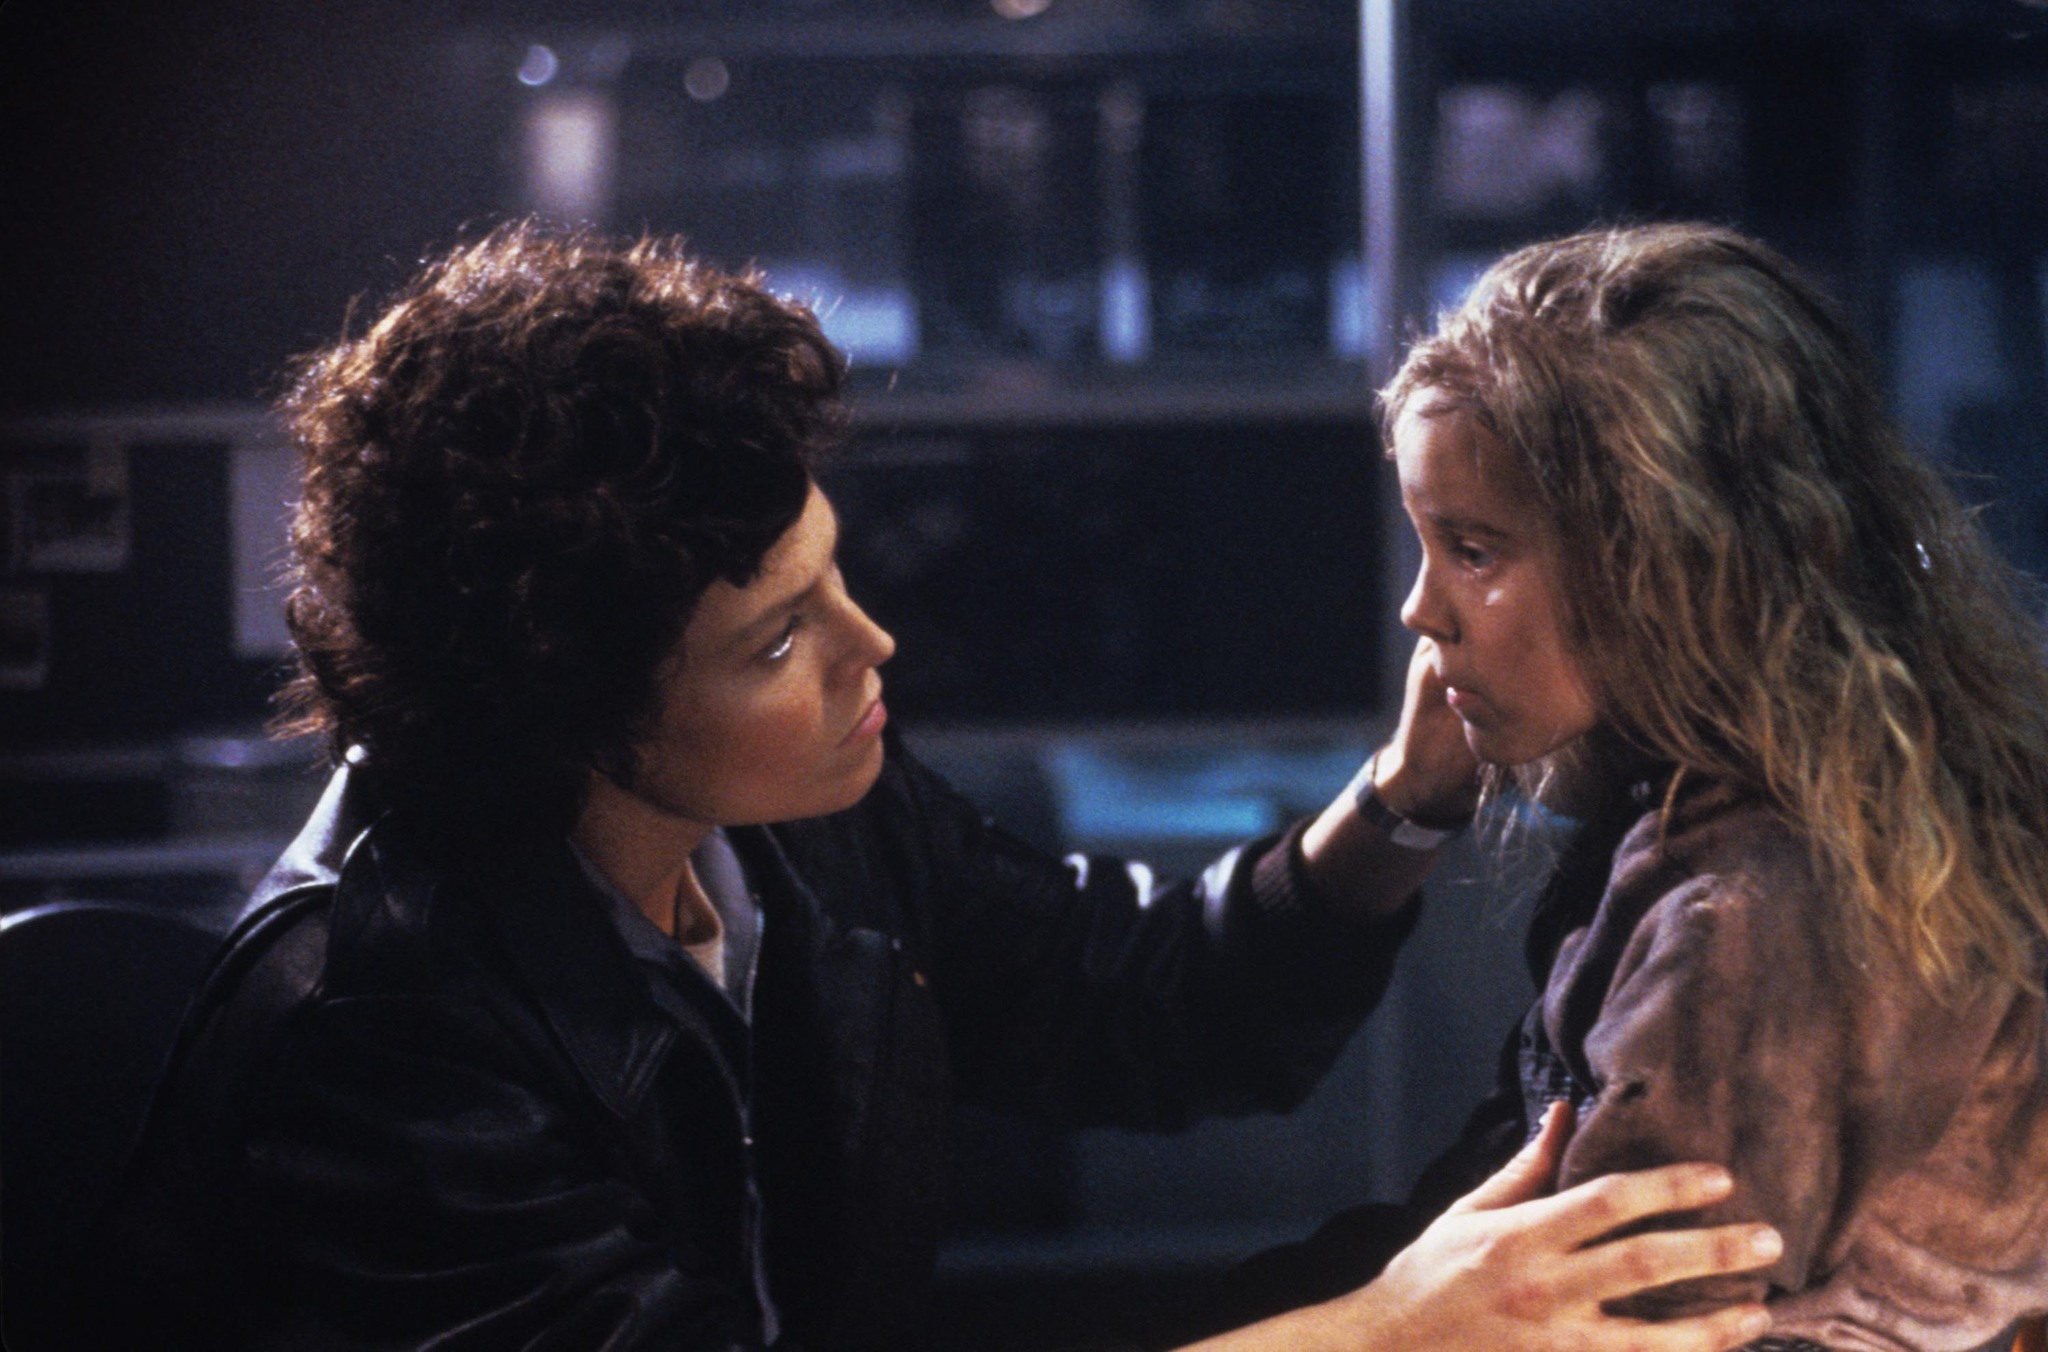 Ripley (Sigourney Weaver) starts to bond with Newt (Carrie Henn) in Aliens